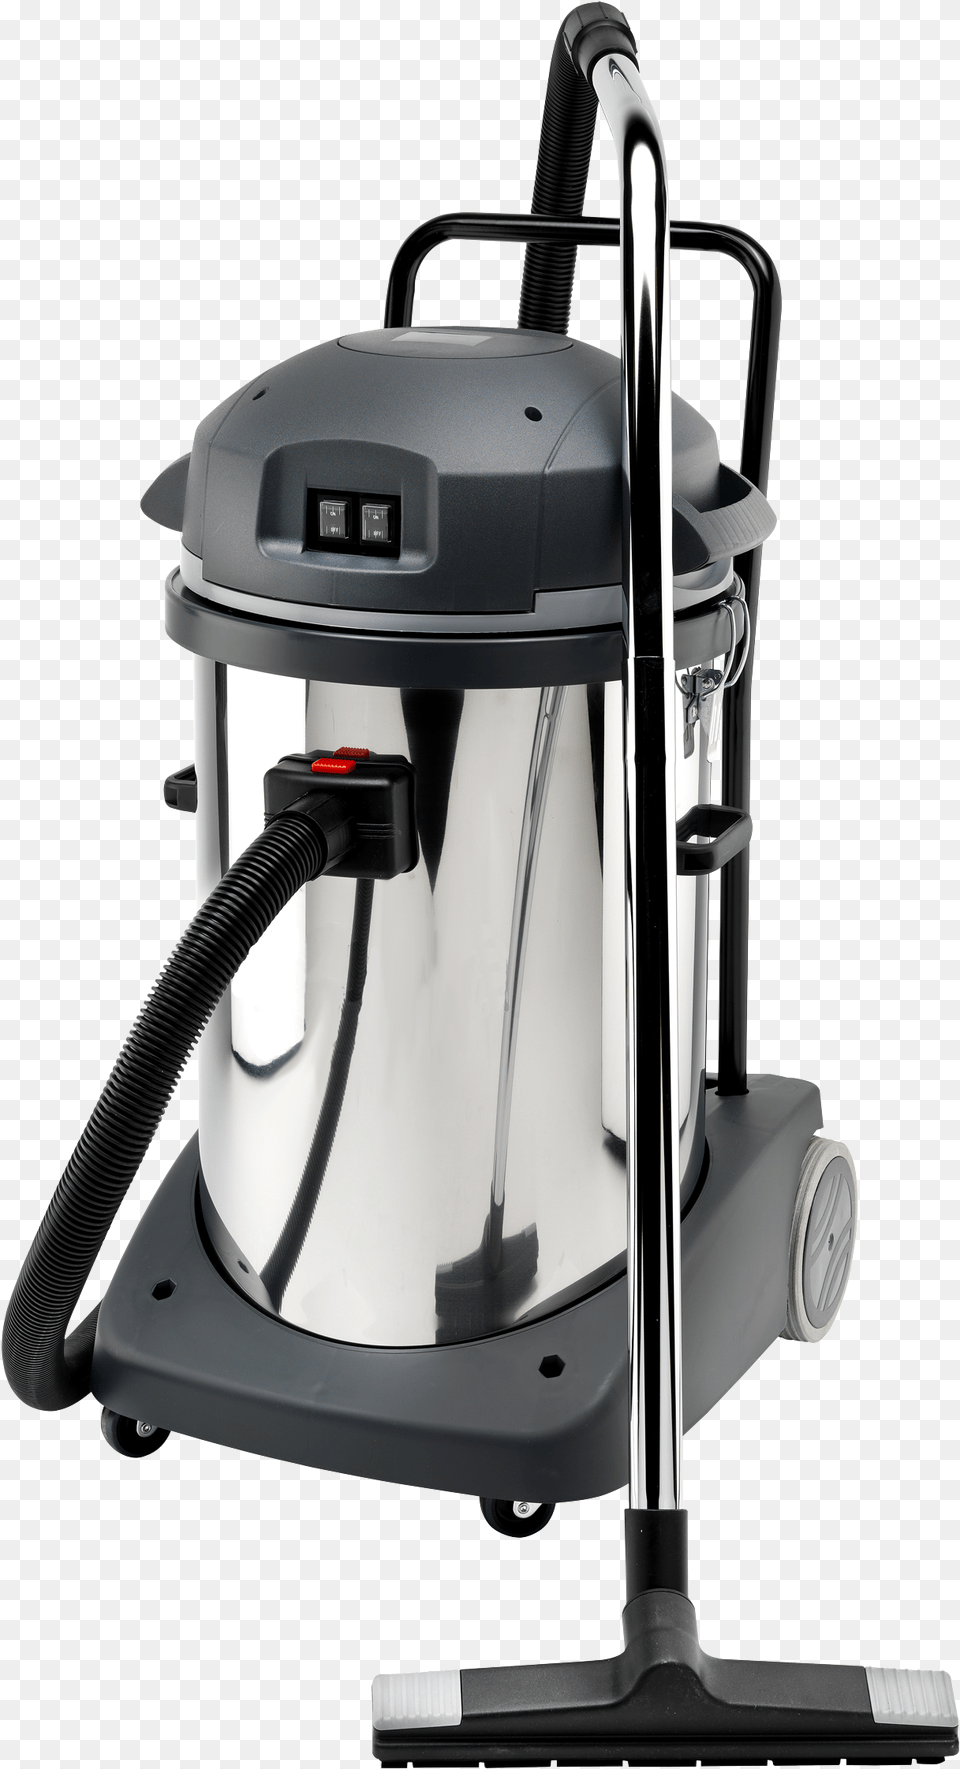 Domino Domino 78 Inox Bs Fasa, Appliance, Device, Electrical Device, Vacuum Cleaner Free Png Download